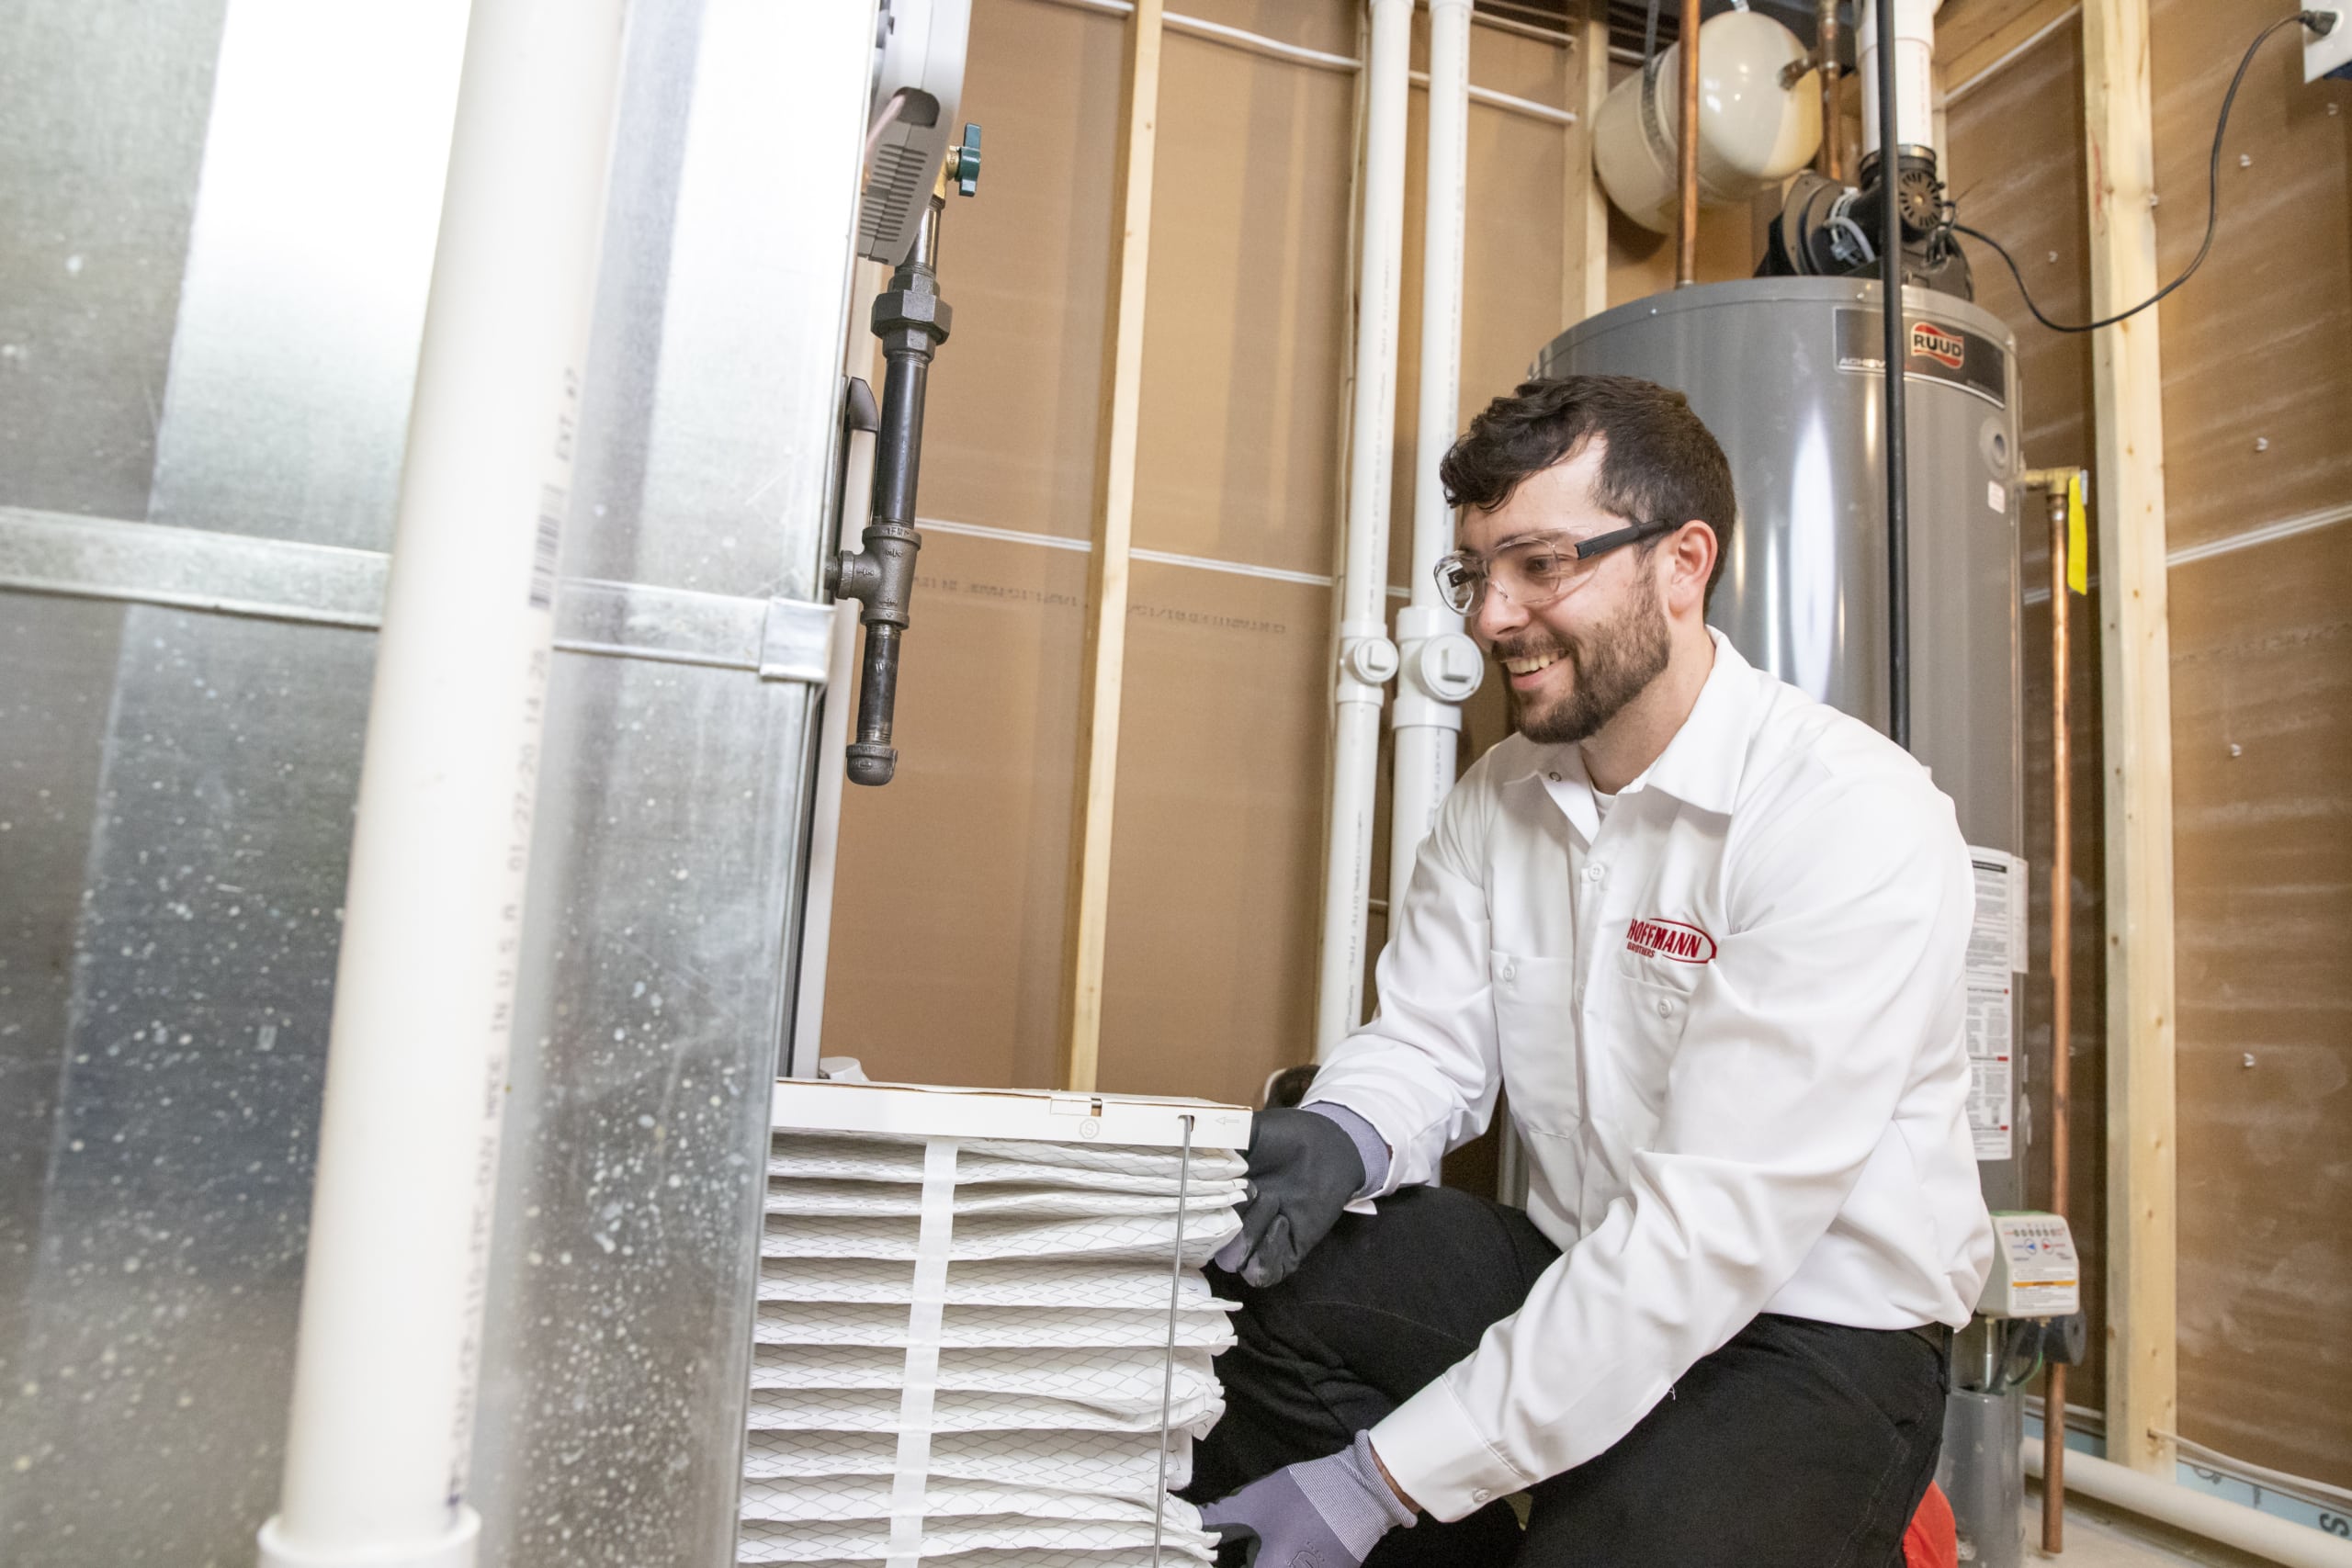 Furnace Services by Hoffmann Brothers in St Louis, MO